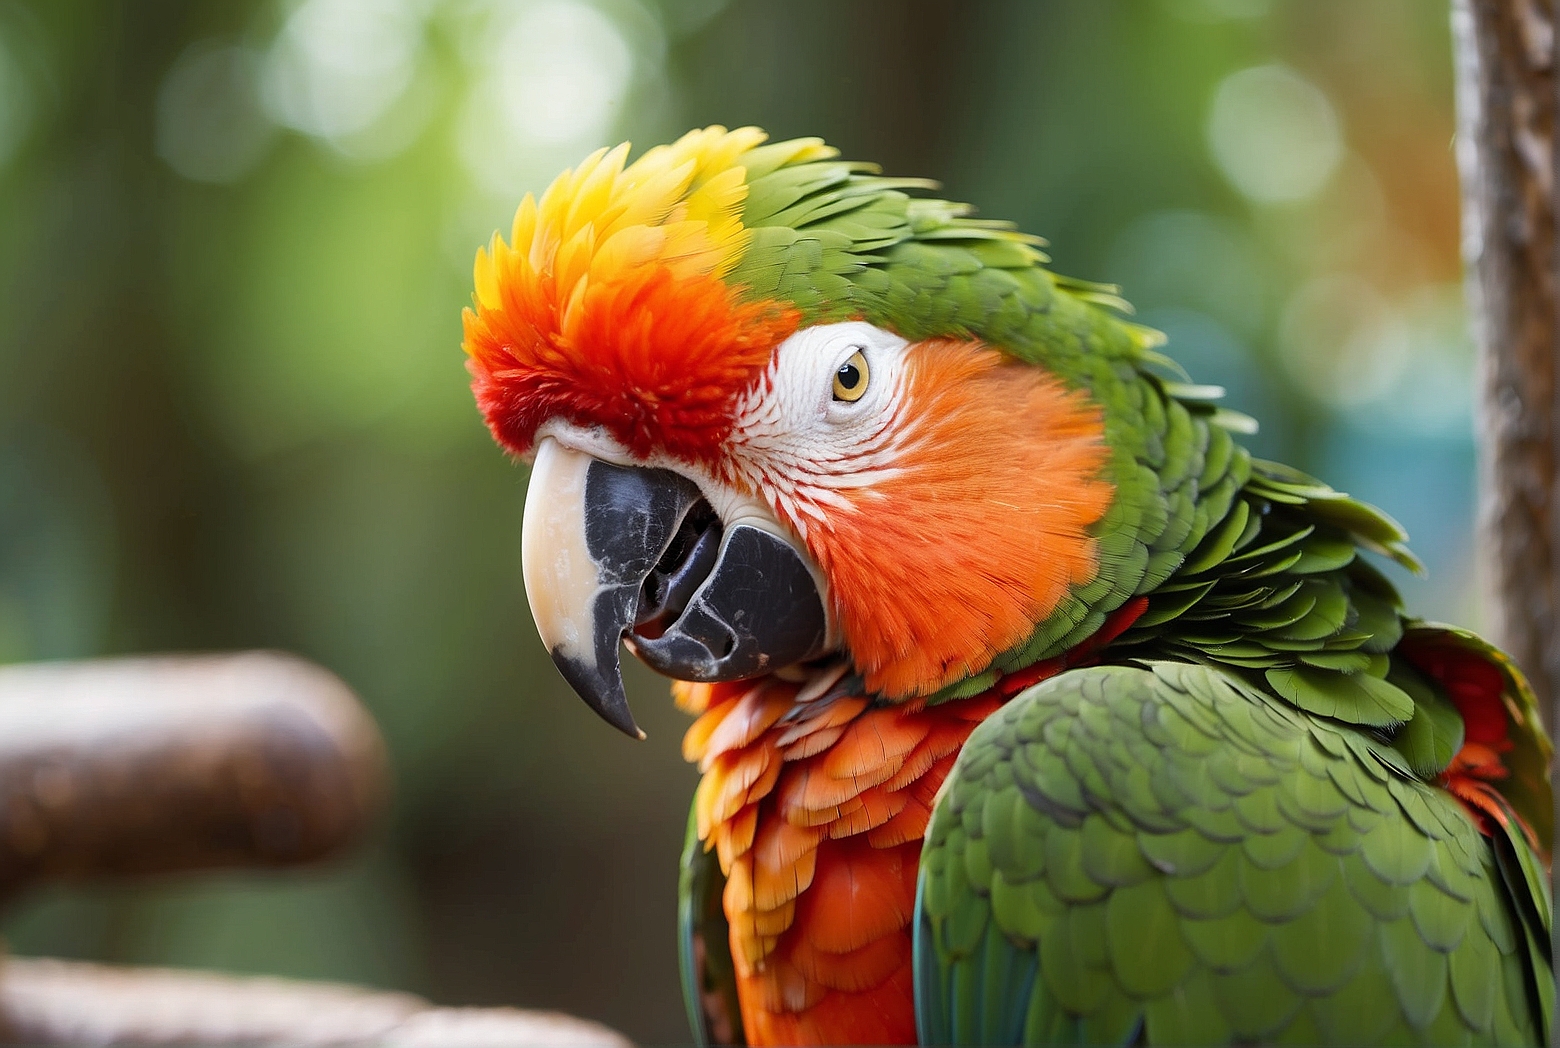 10 Tips to Stop a Parrot from Biting